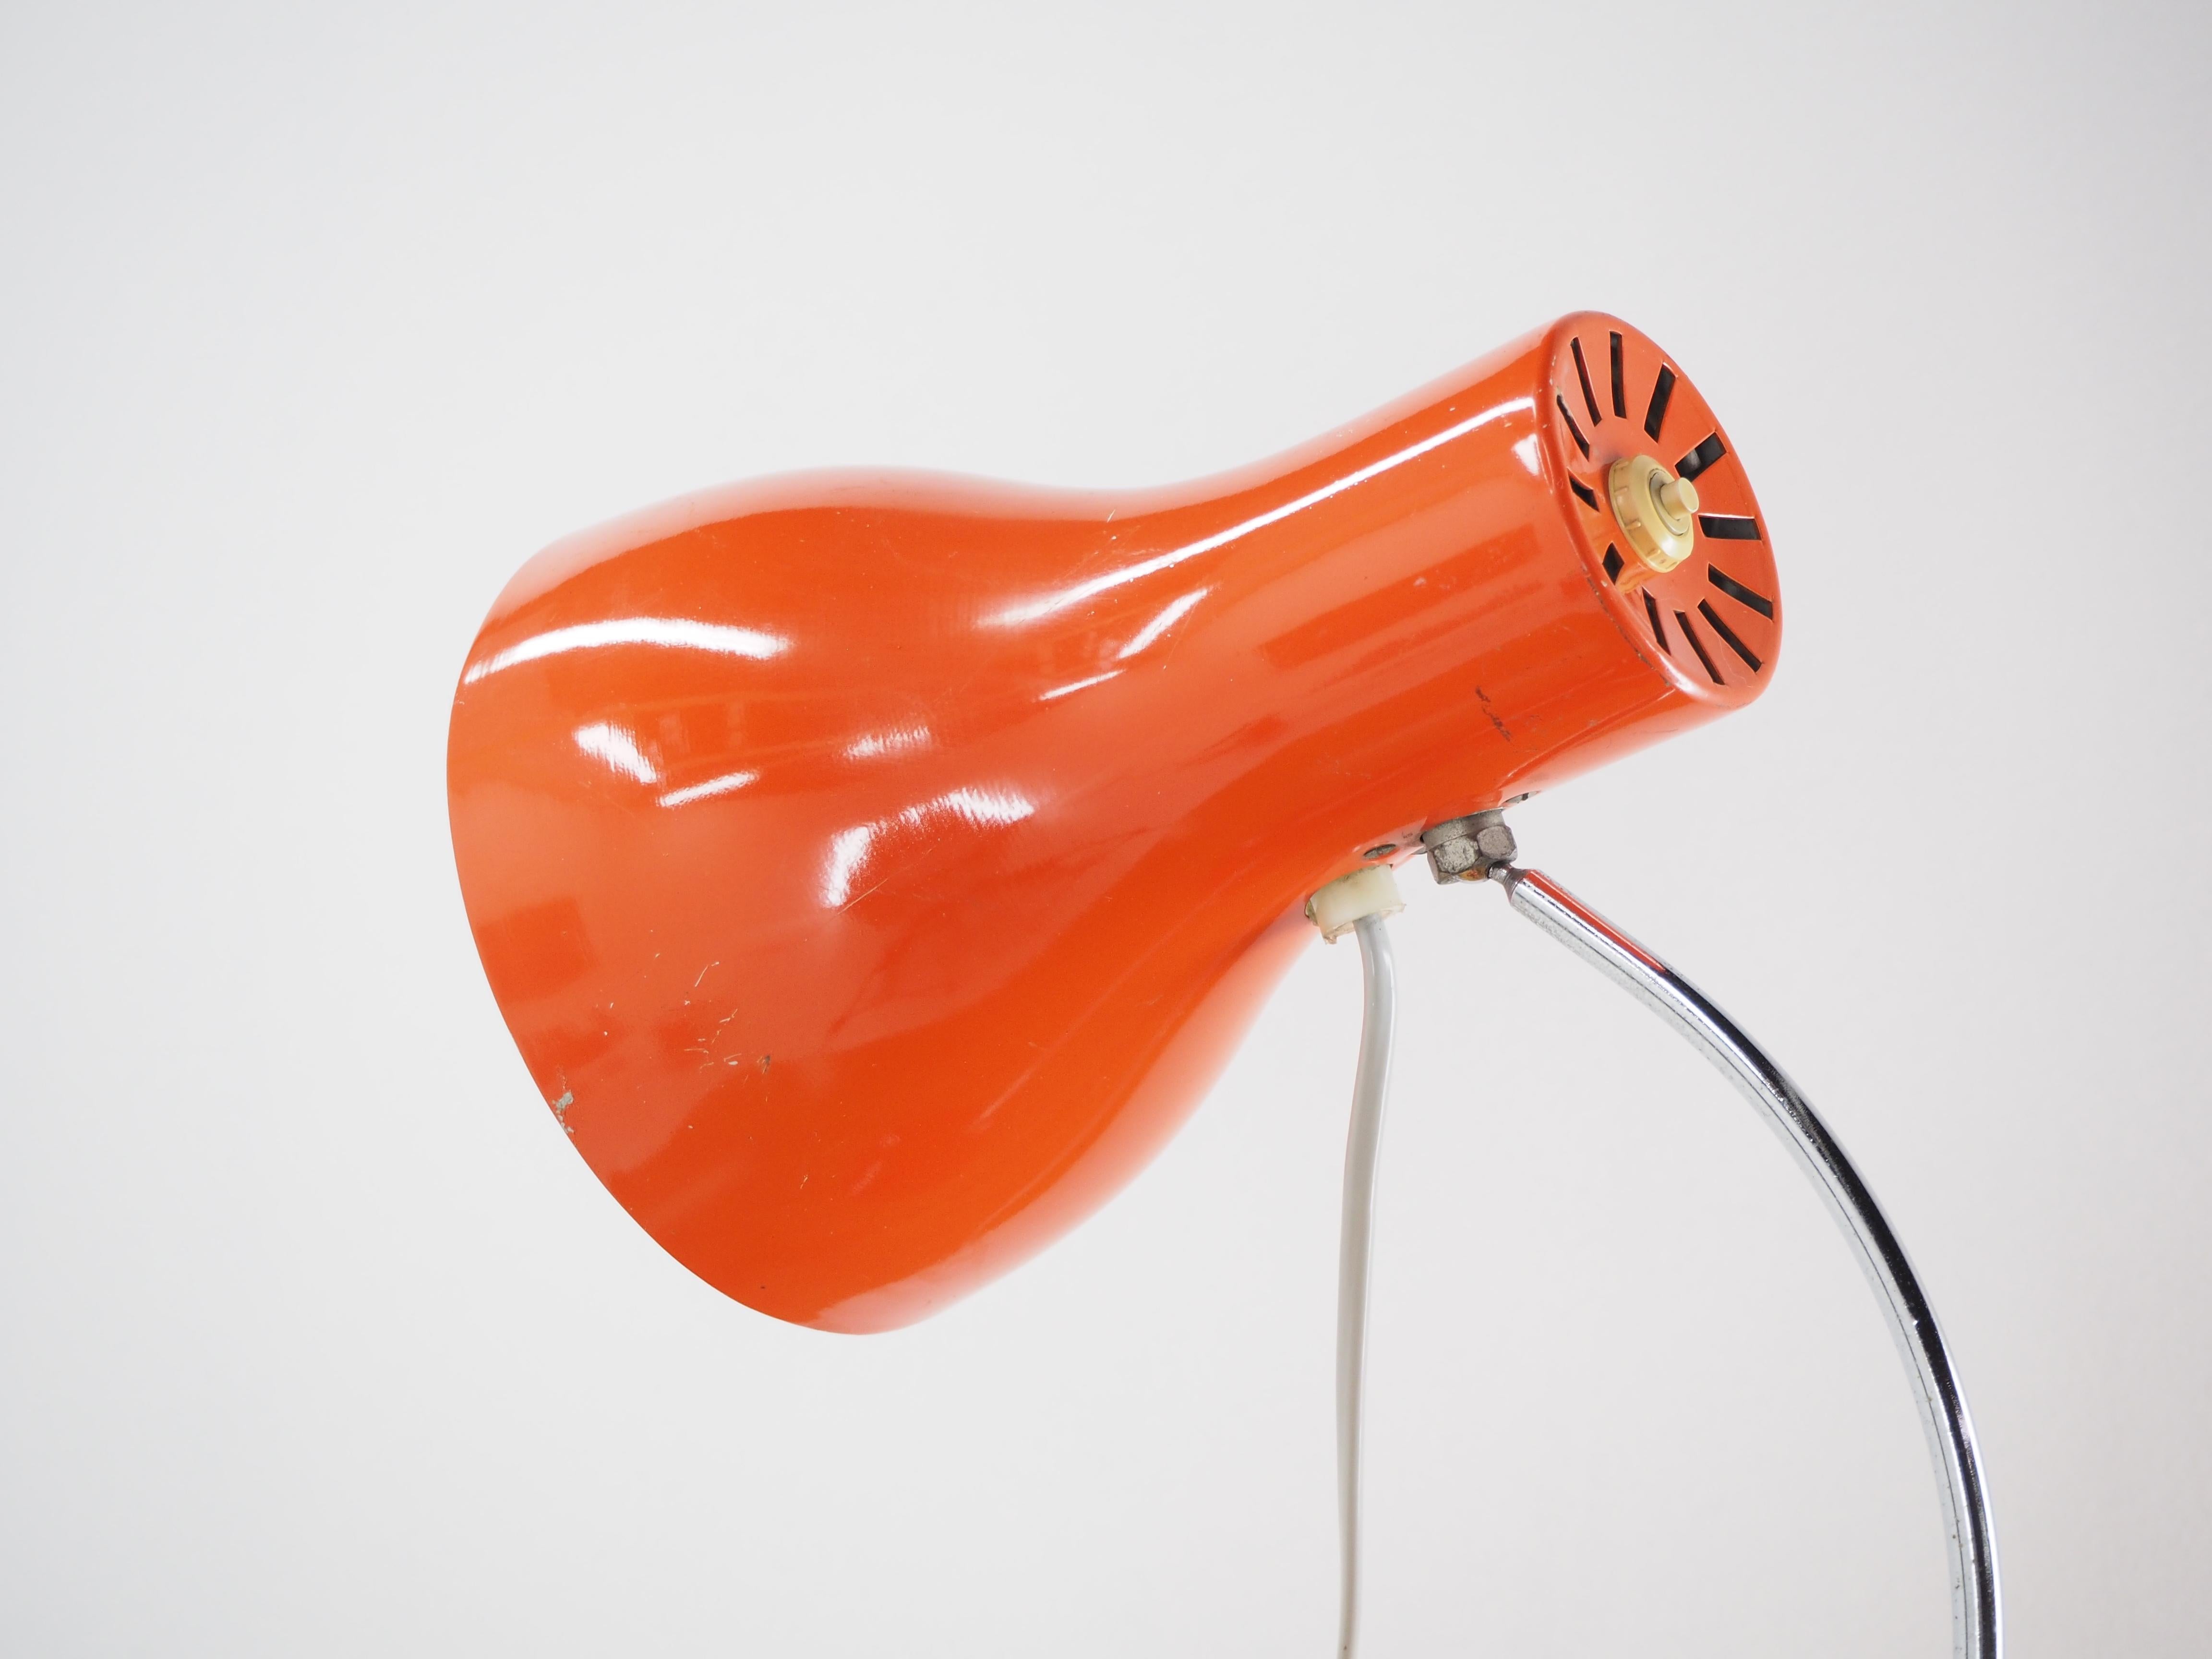 Czech Midcentury Table Lamp Designed by J. Hurka for Napako 1970s type 0521